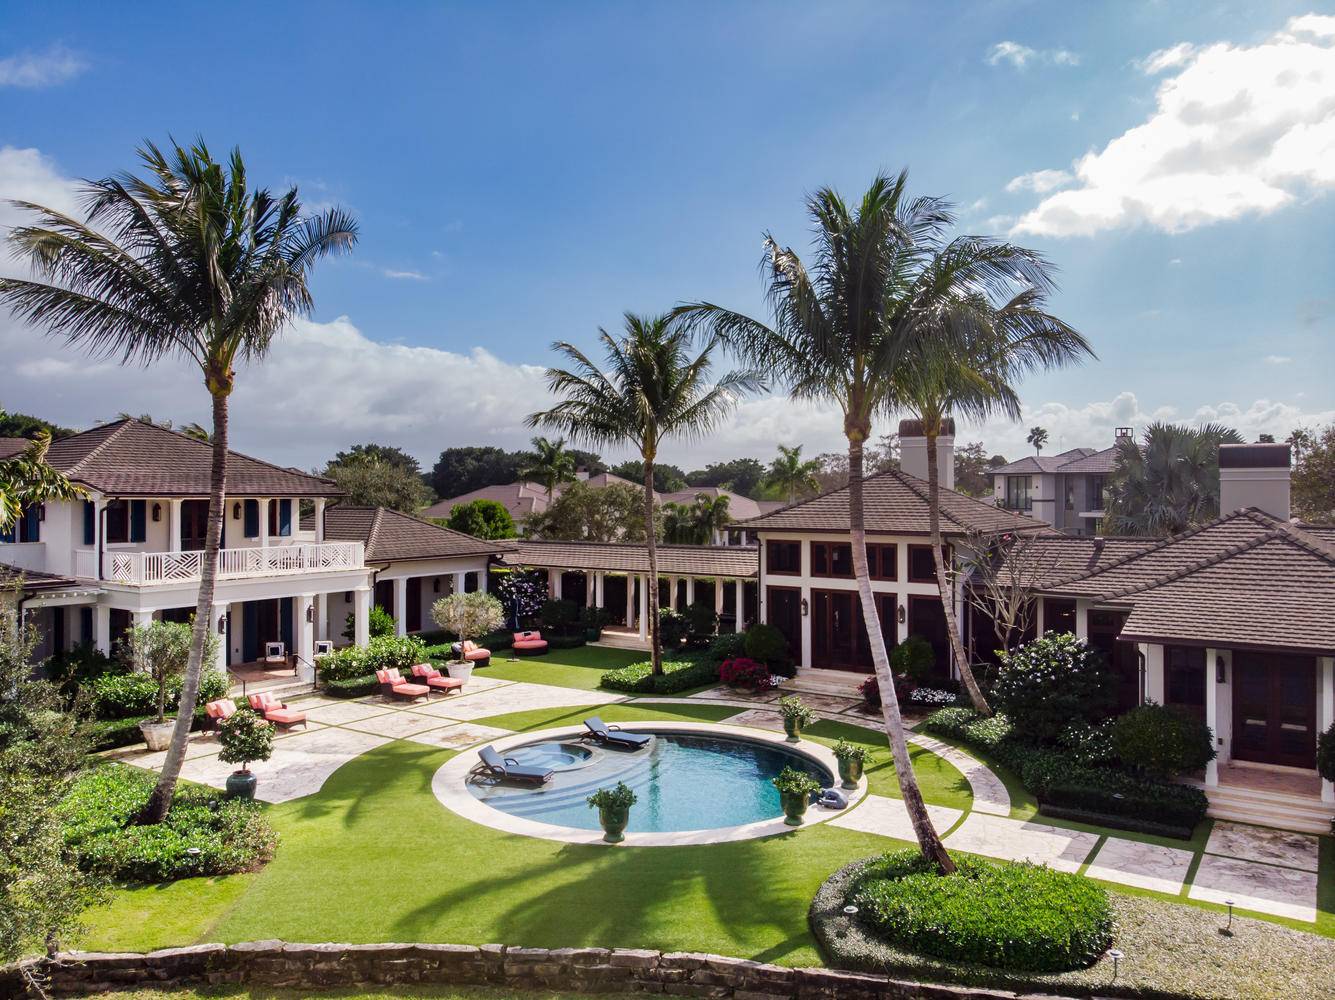 Located in the exclusive Cypress Island subdivision of Palm Beach Polo rests this breathe taking British West Indies style estate home.